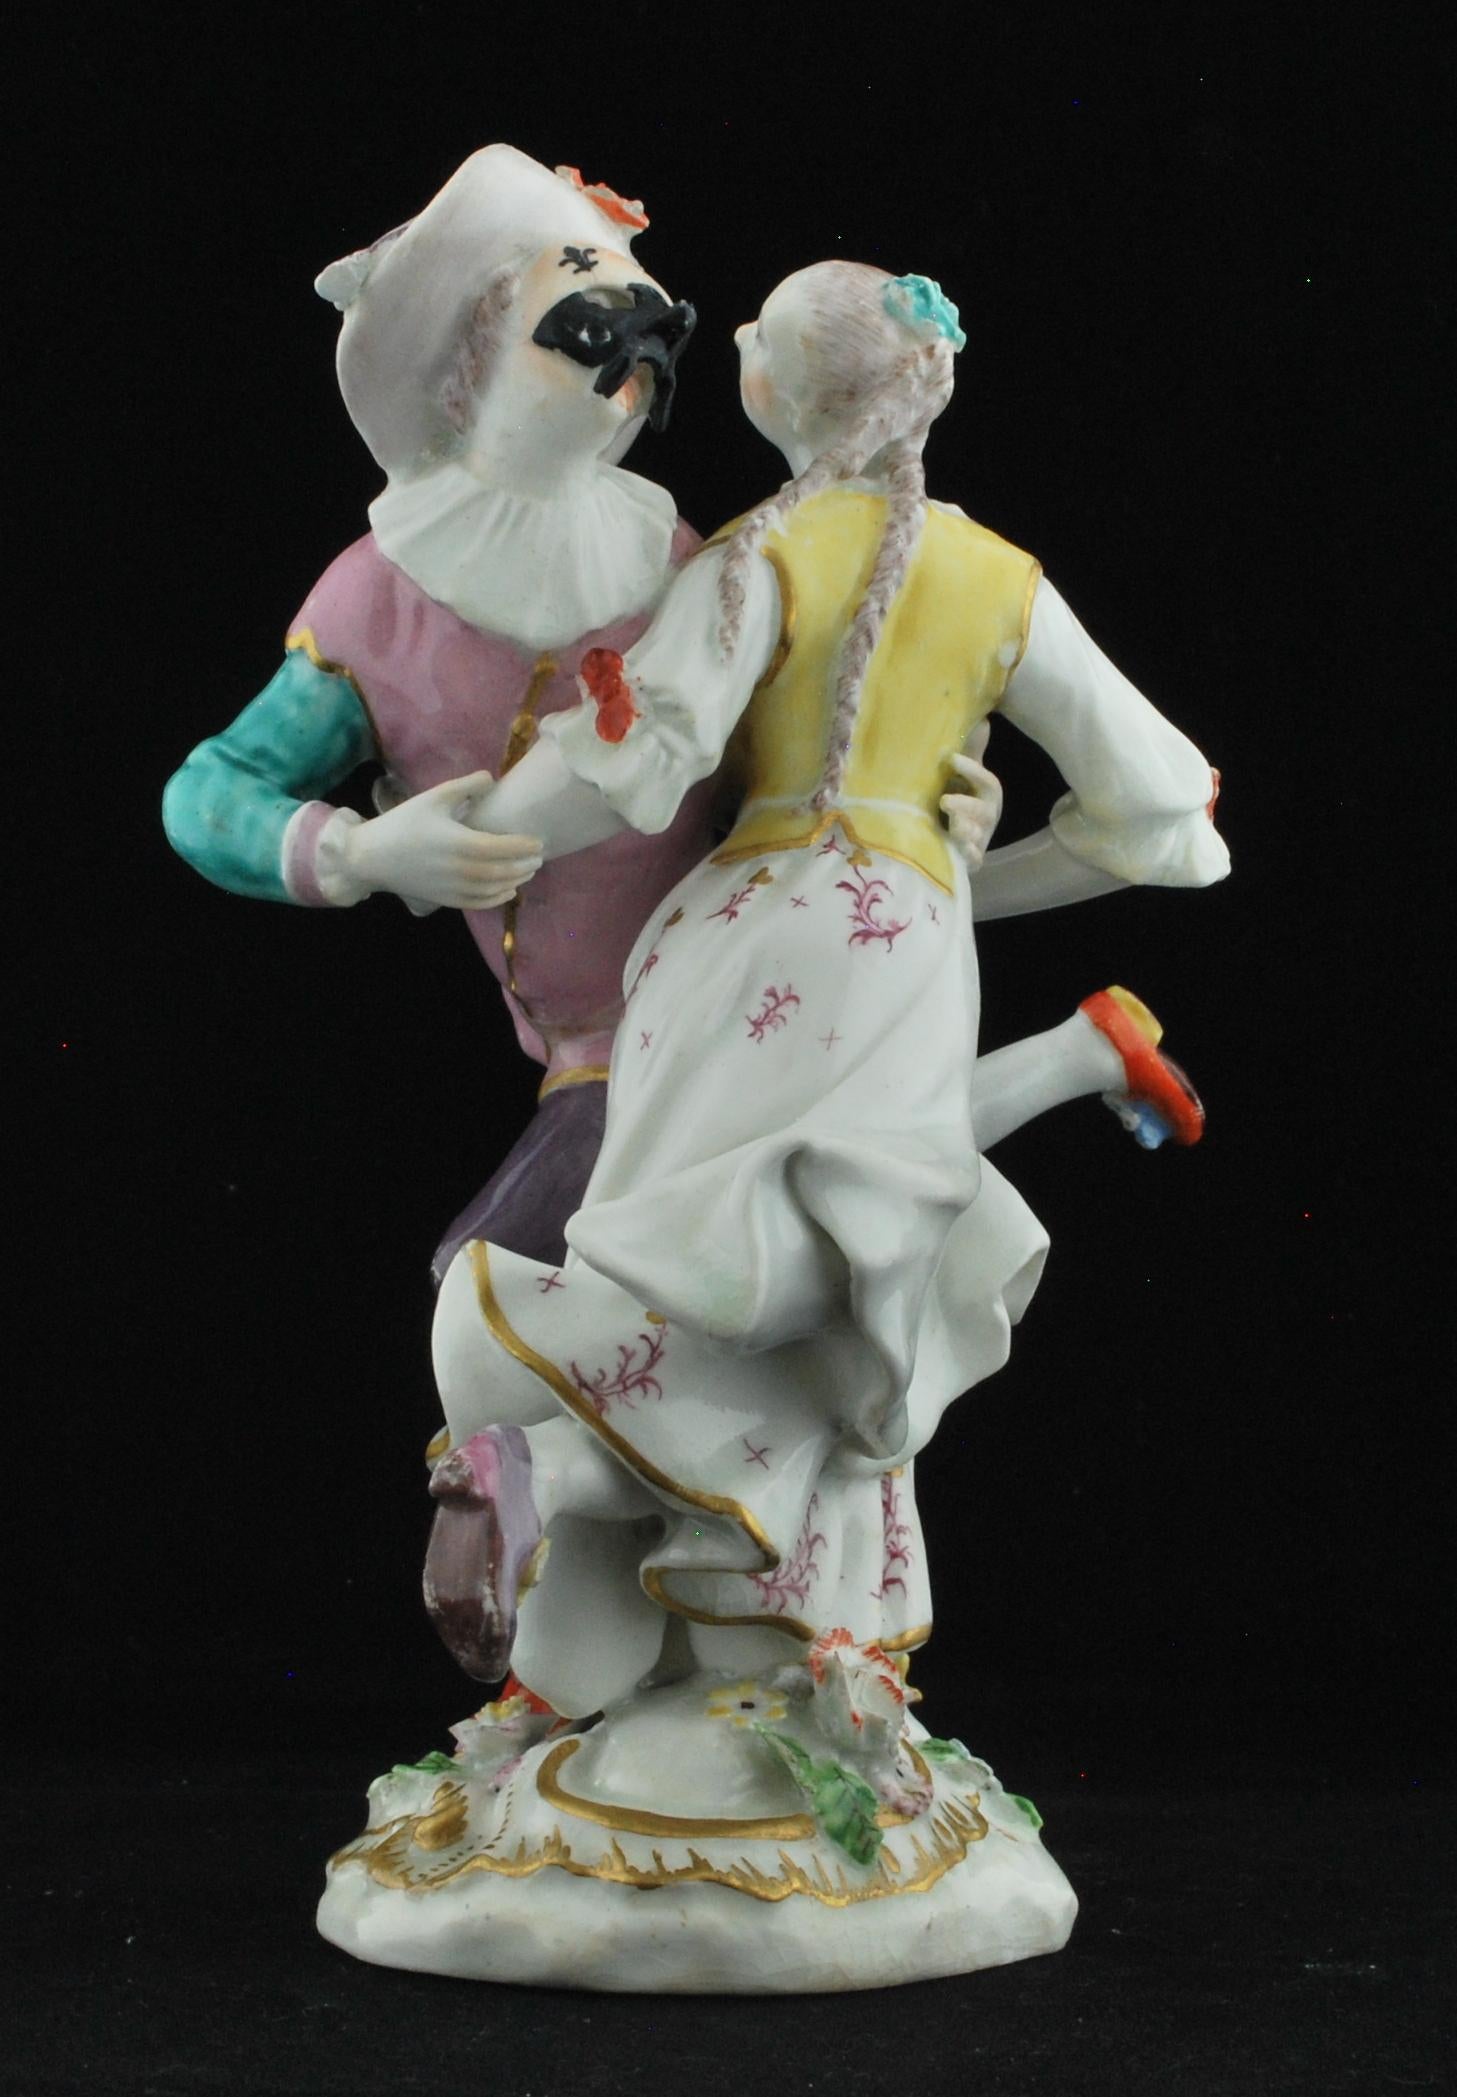 One of the best: Harlequin & Columbine Dancing, after the Meissen figure, from the series of characters from the Commedia dell'Arte.

 